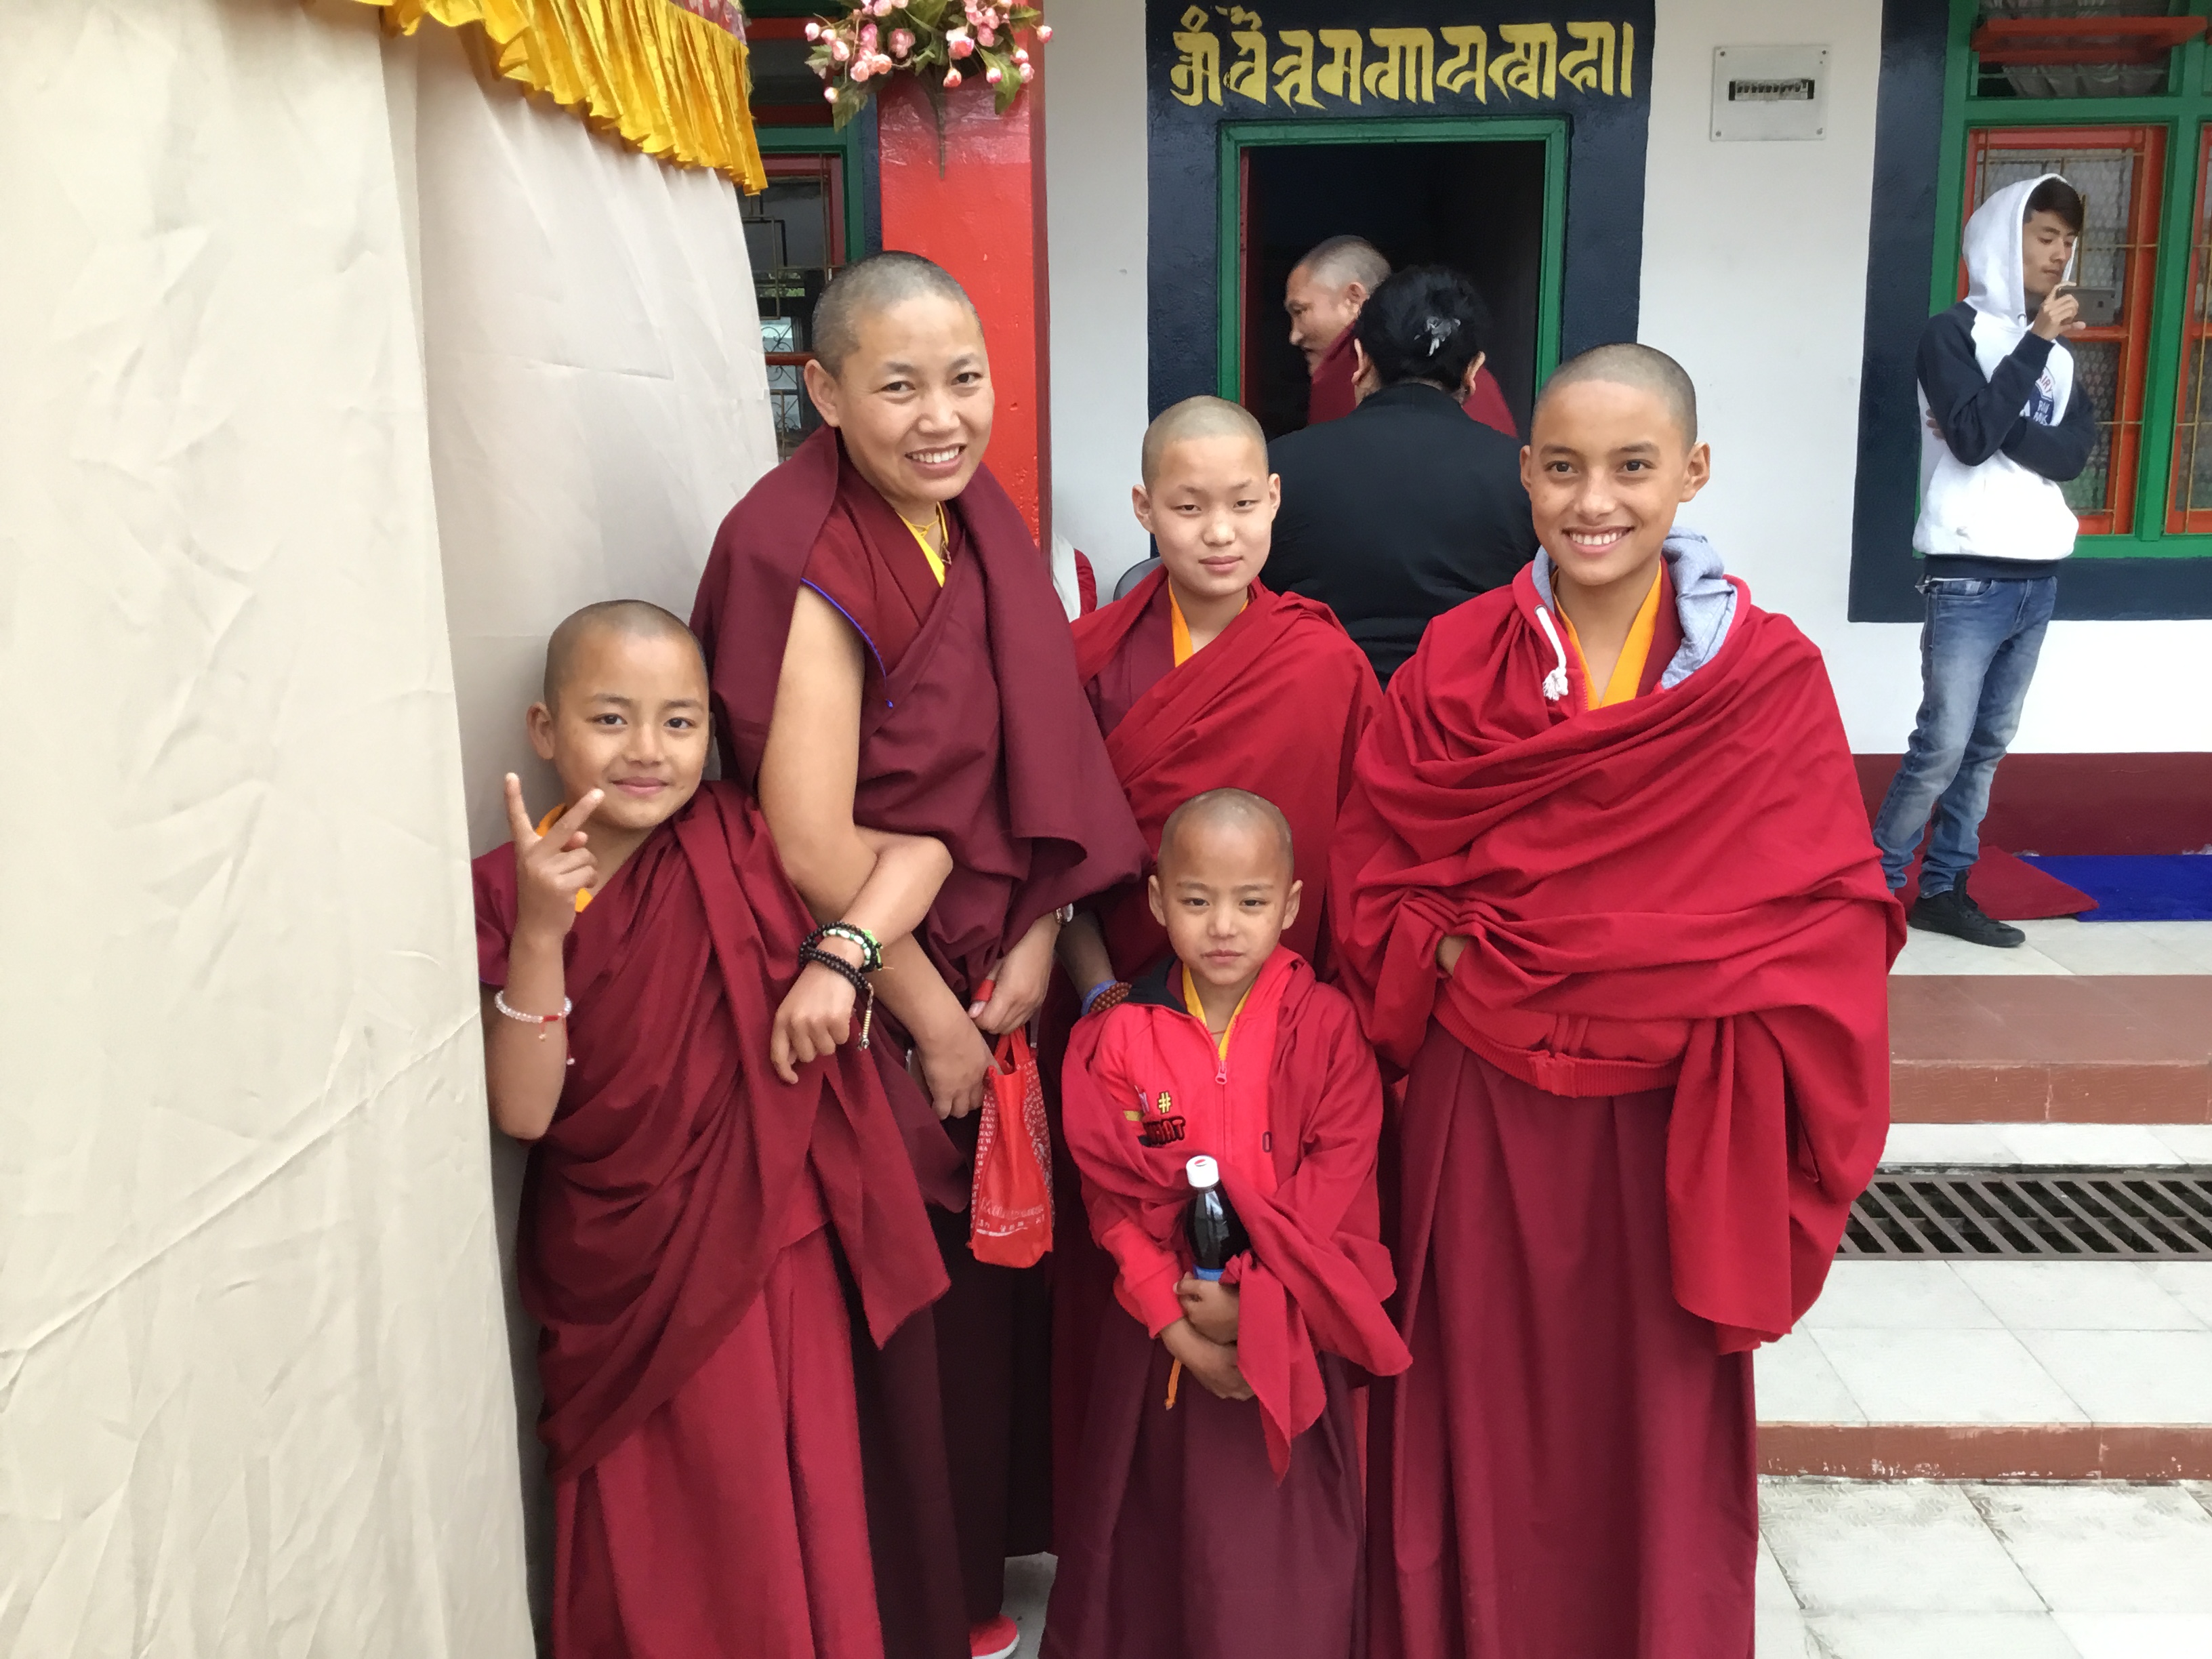 Nuns at Palchen Chosling Lachi Nunnery in Sikkim